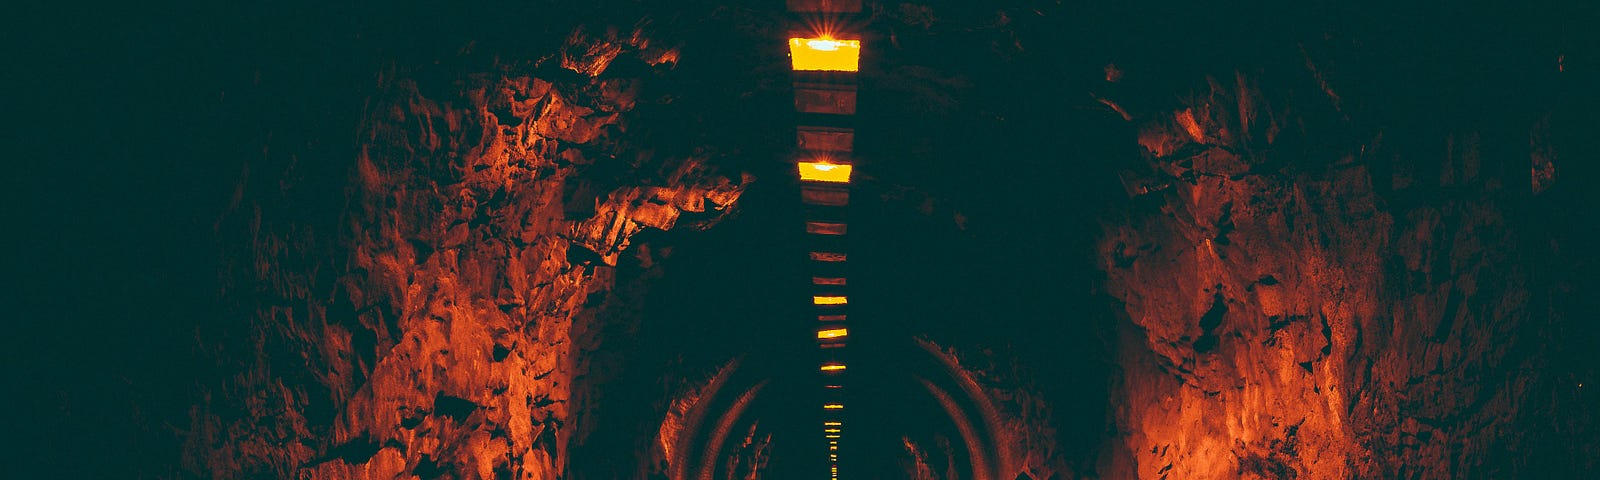 A dark tunnel with overhead lights turned on. The orange glow of the lights reflects on the wet road.